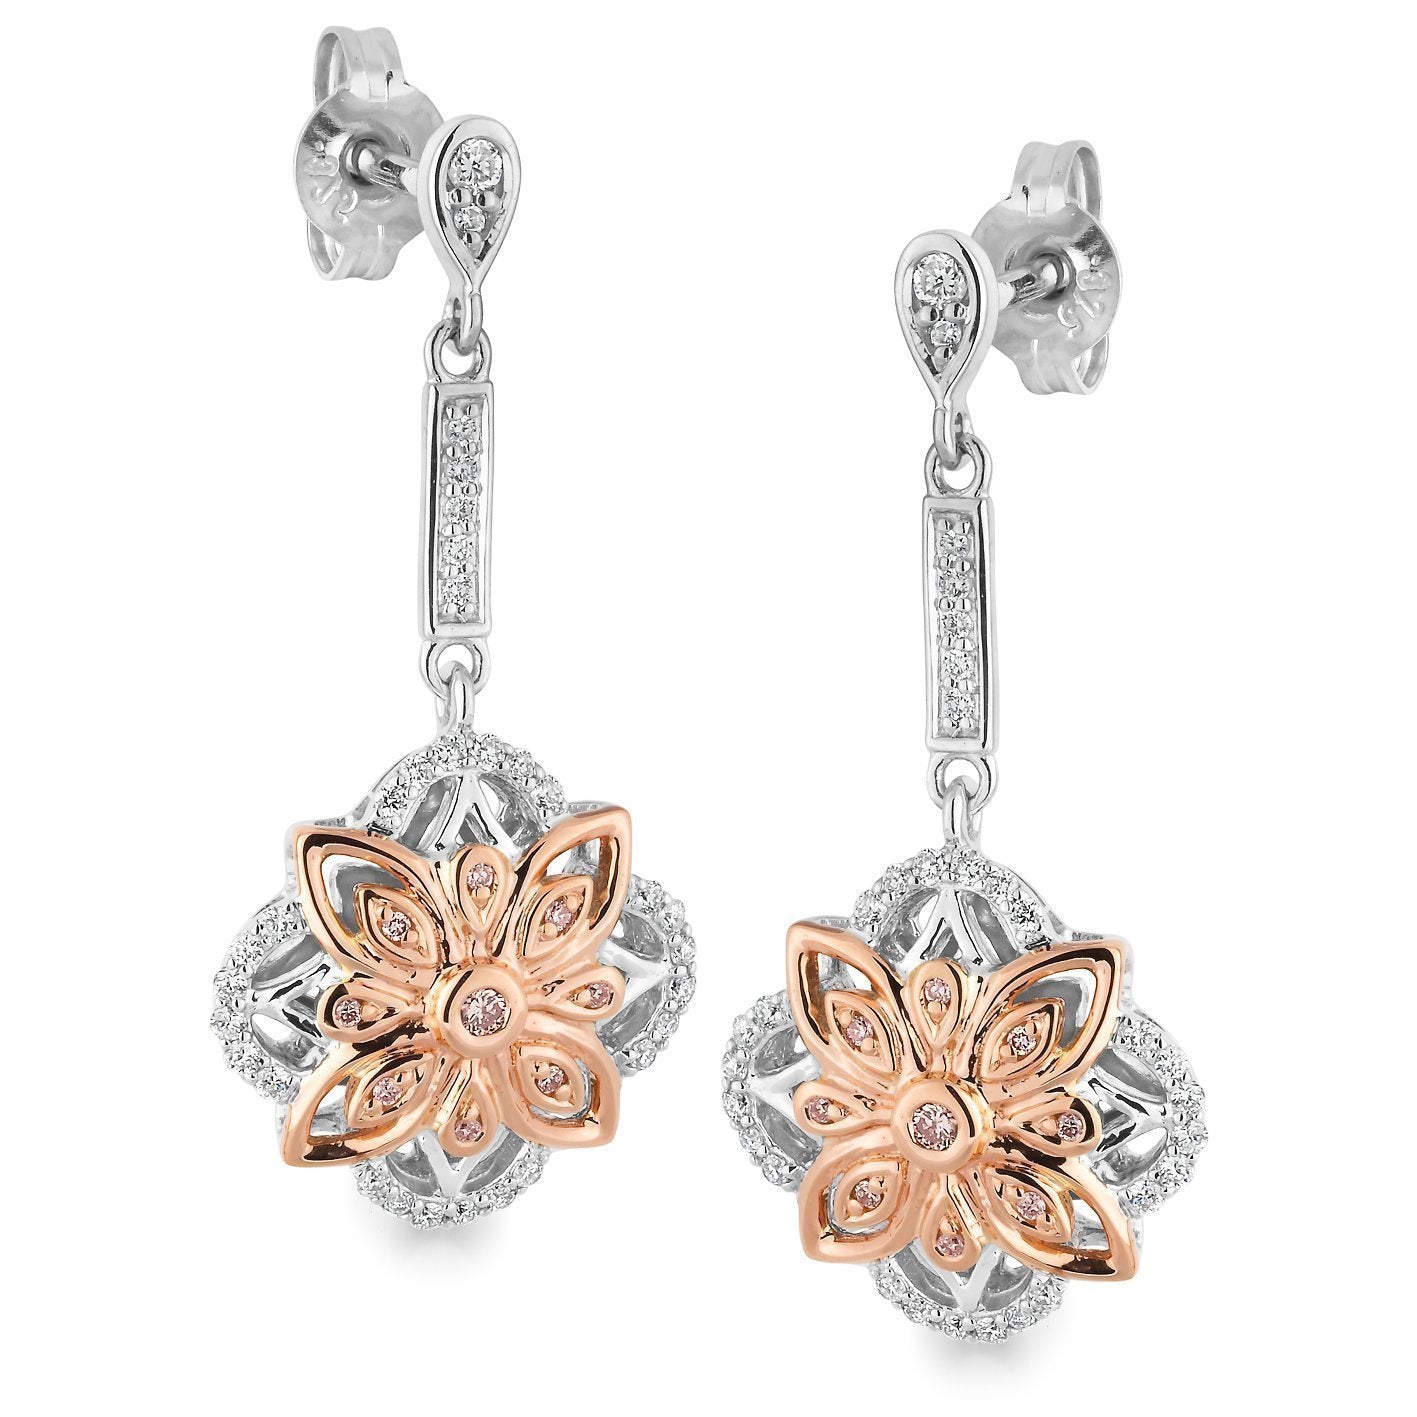 PINK CAVIAR 0.212ct Pink Diamond Earrings in 9ct White & Rose Gold